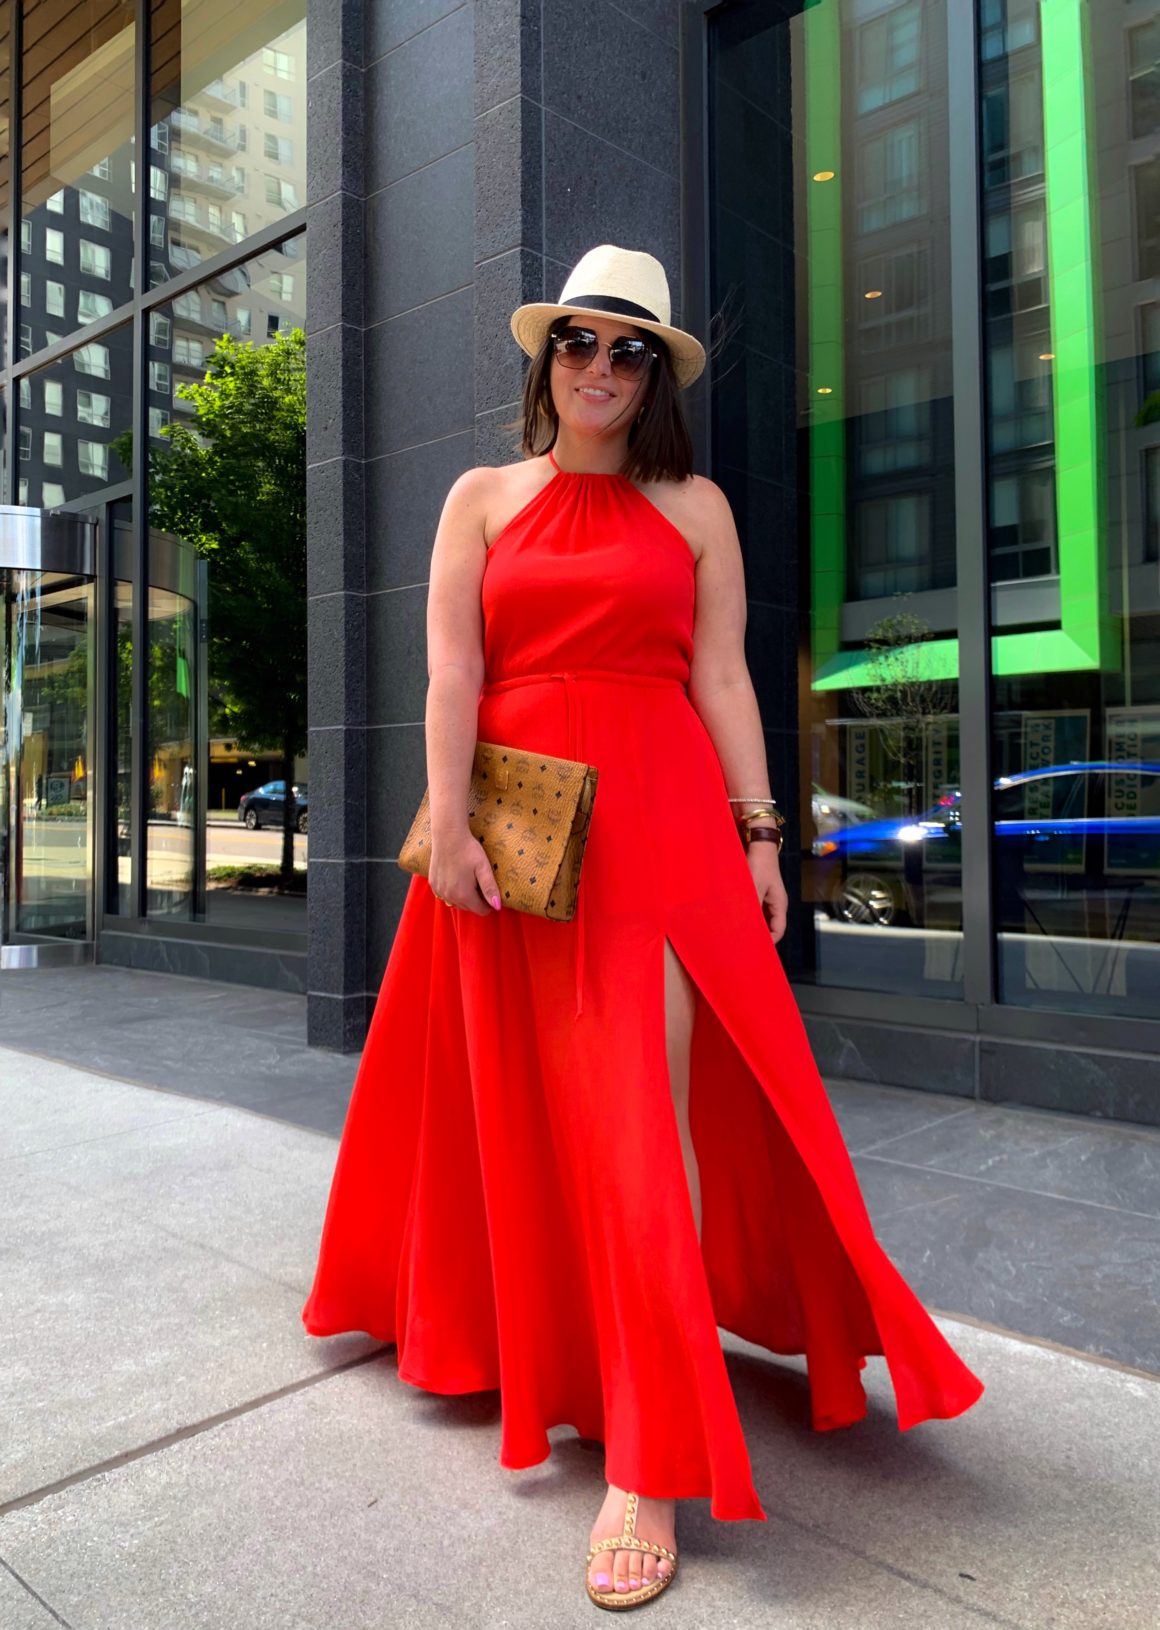 SUMMER OUTFIT: HOW TO STYLE A MAXI DRESS